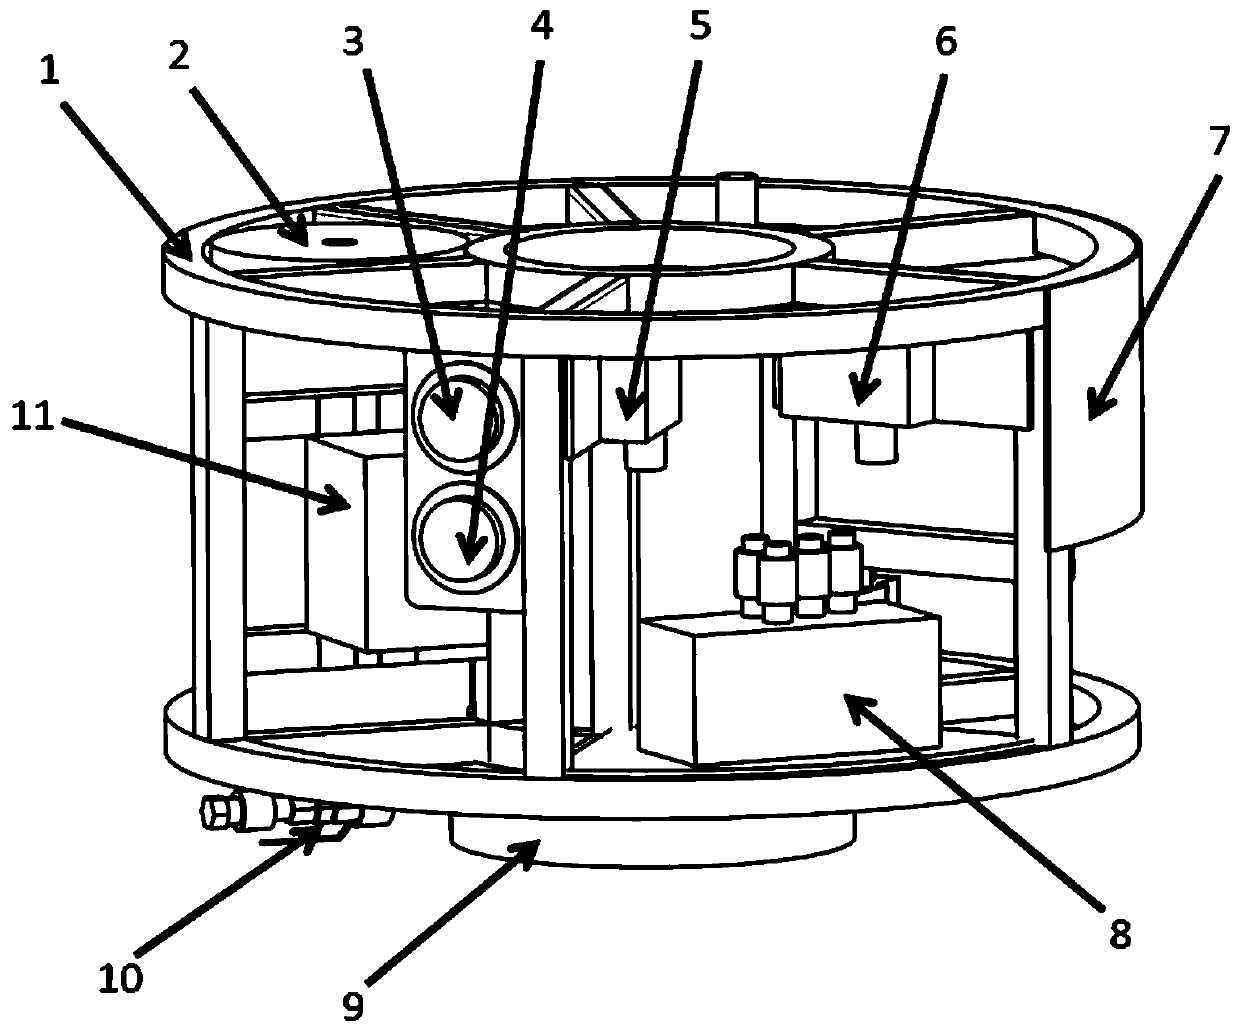 High-pressure gas-liquid linkage device for rapidly closing spiral rotating oil cylinder